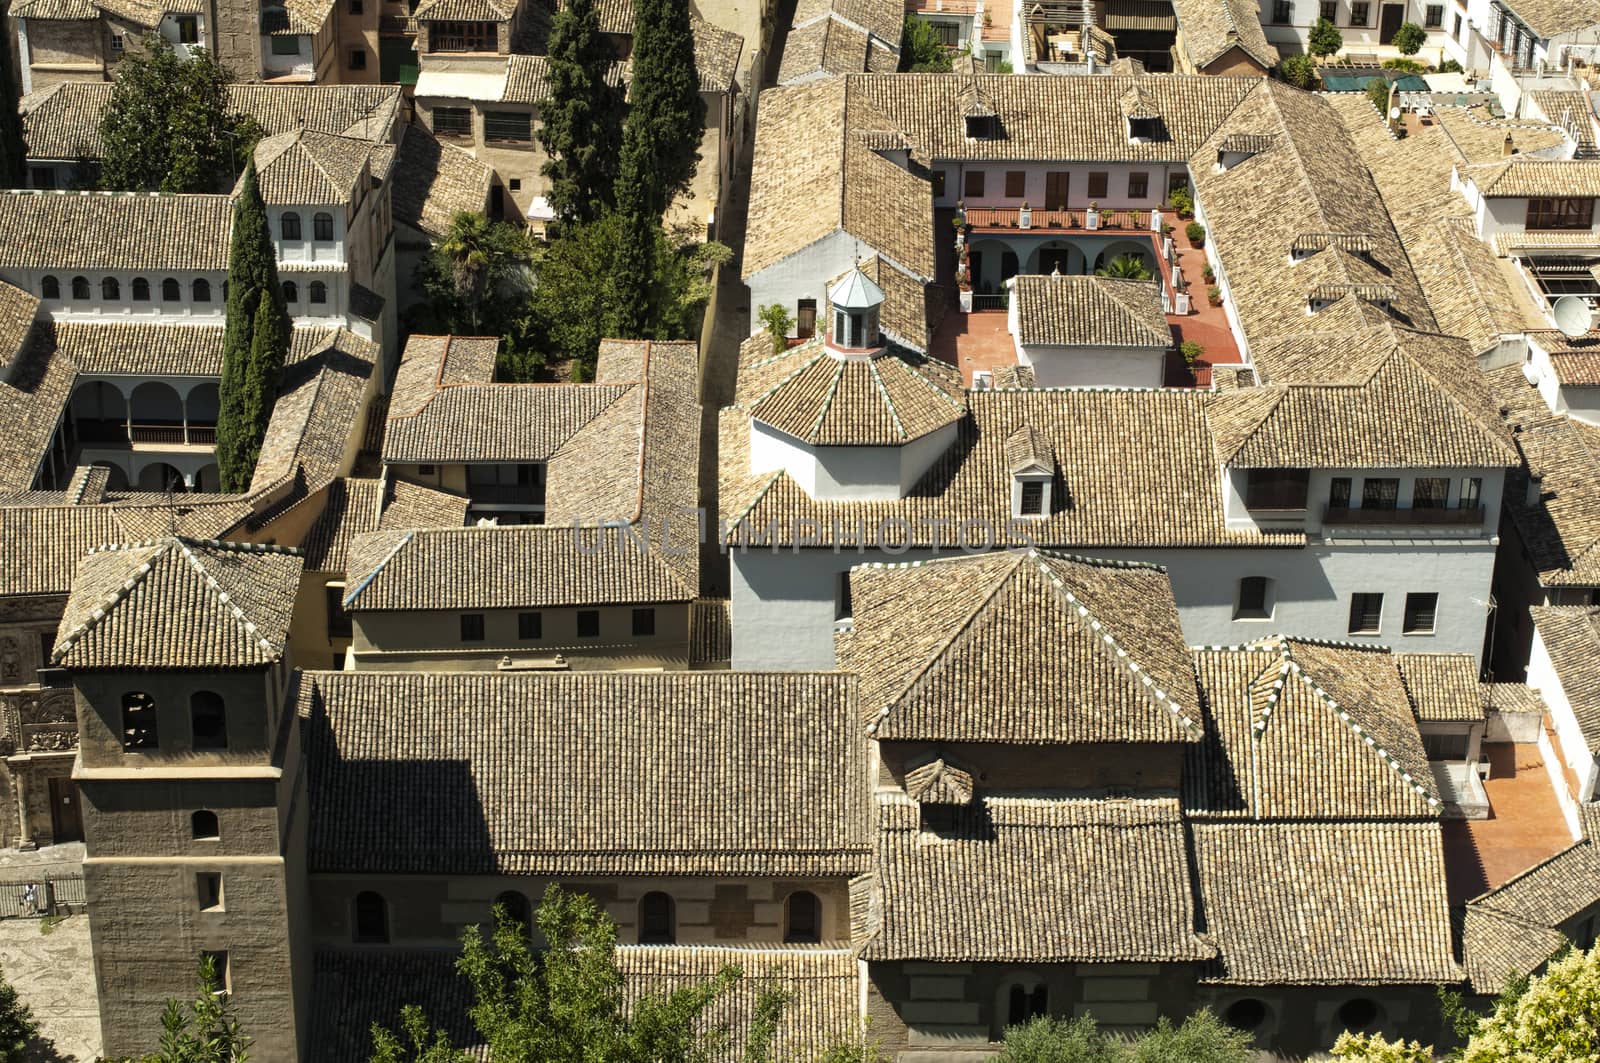 Roofs of ancient buildings. High point of view.